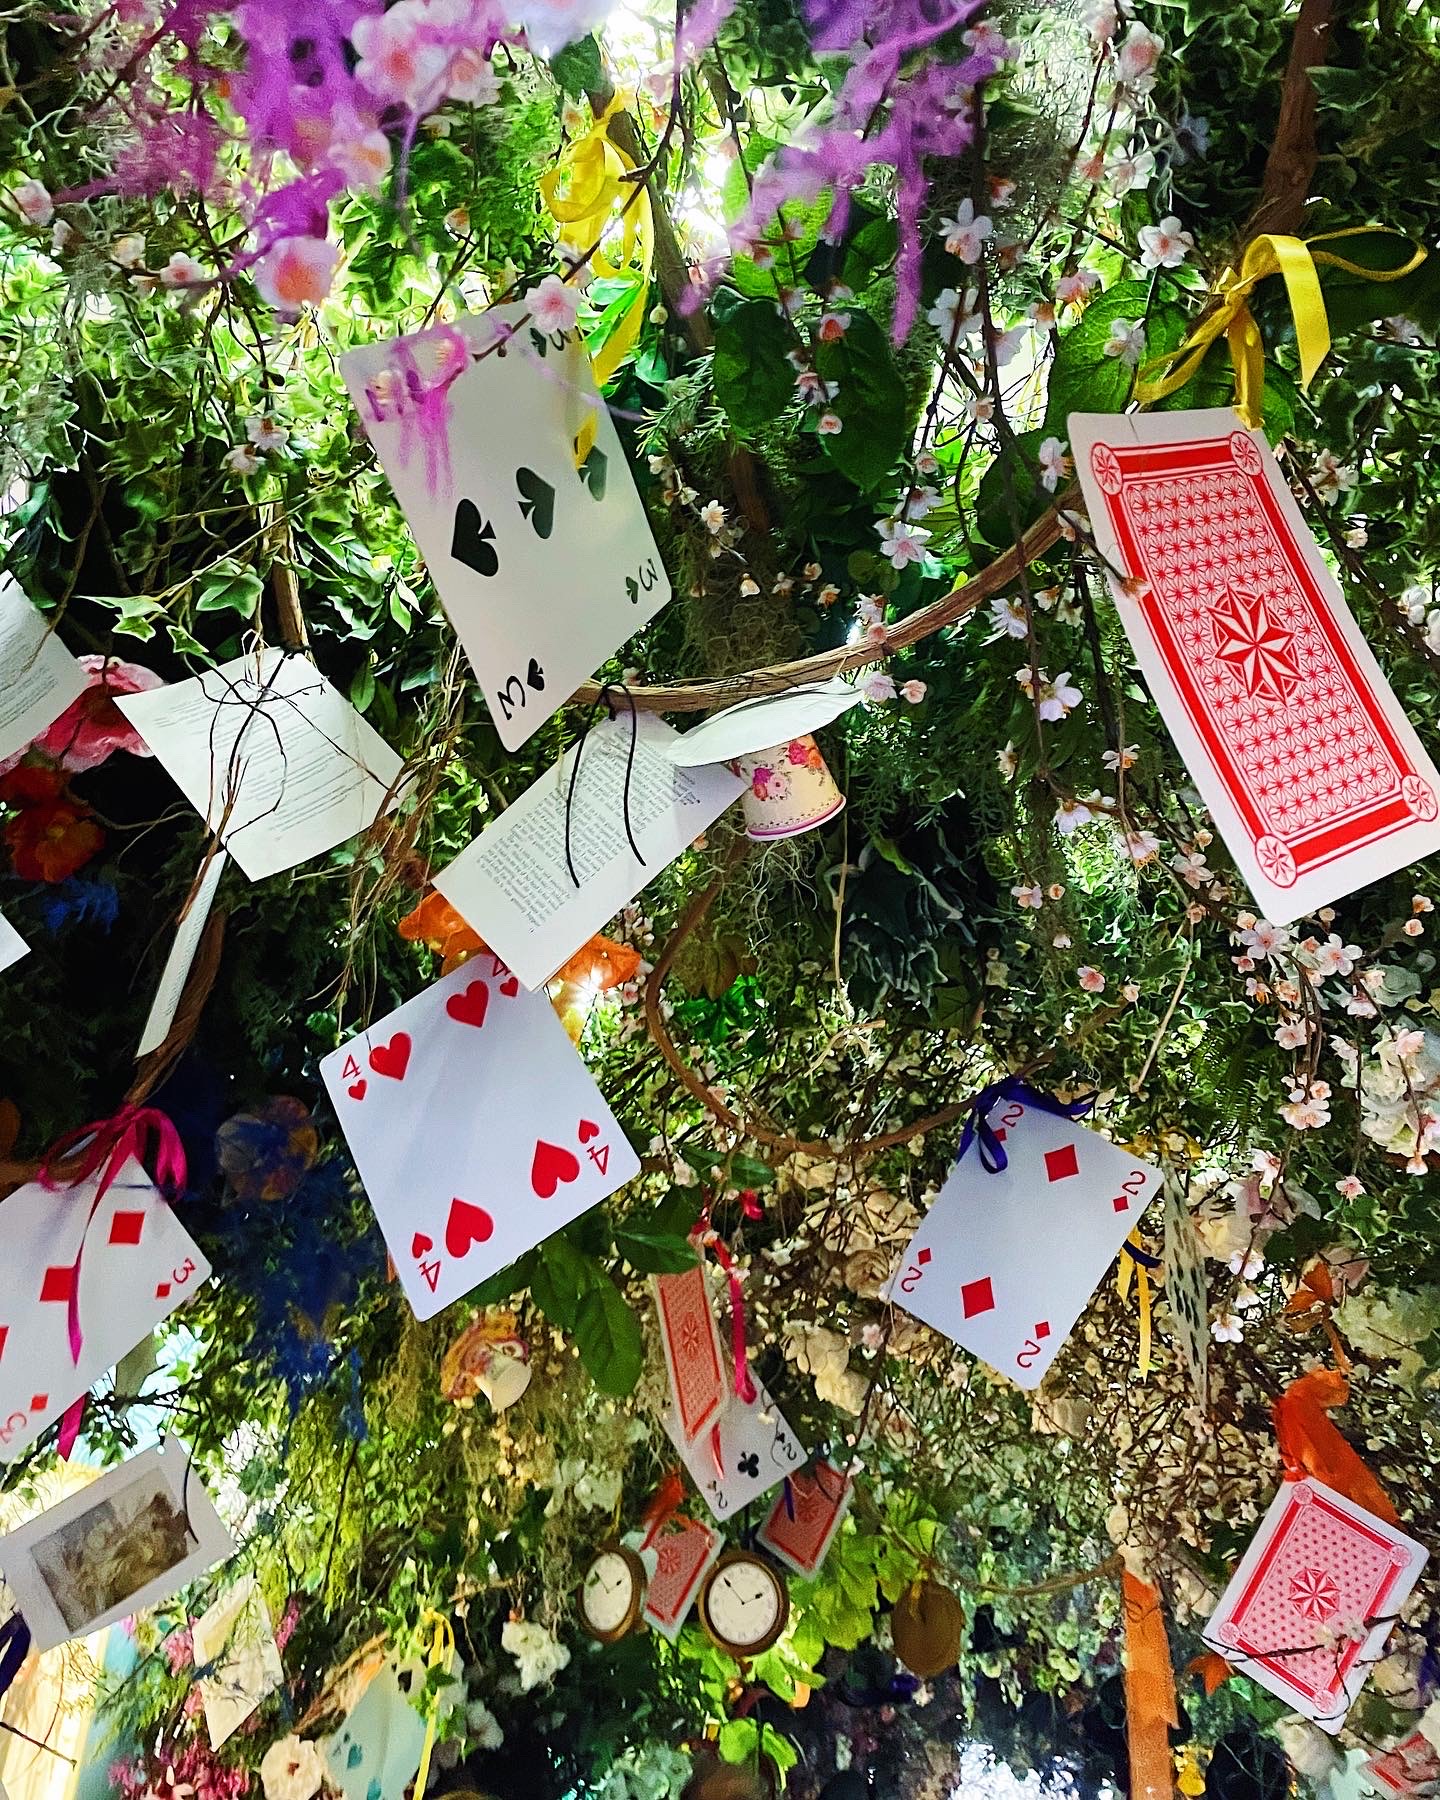 Giant playing cards and teacups hanging from an overhead floral canopy.